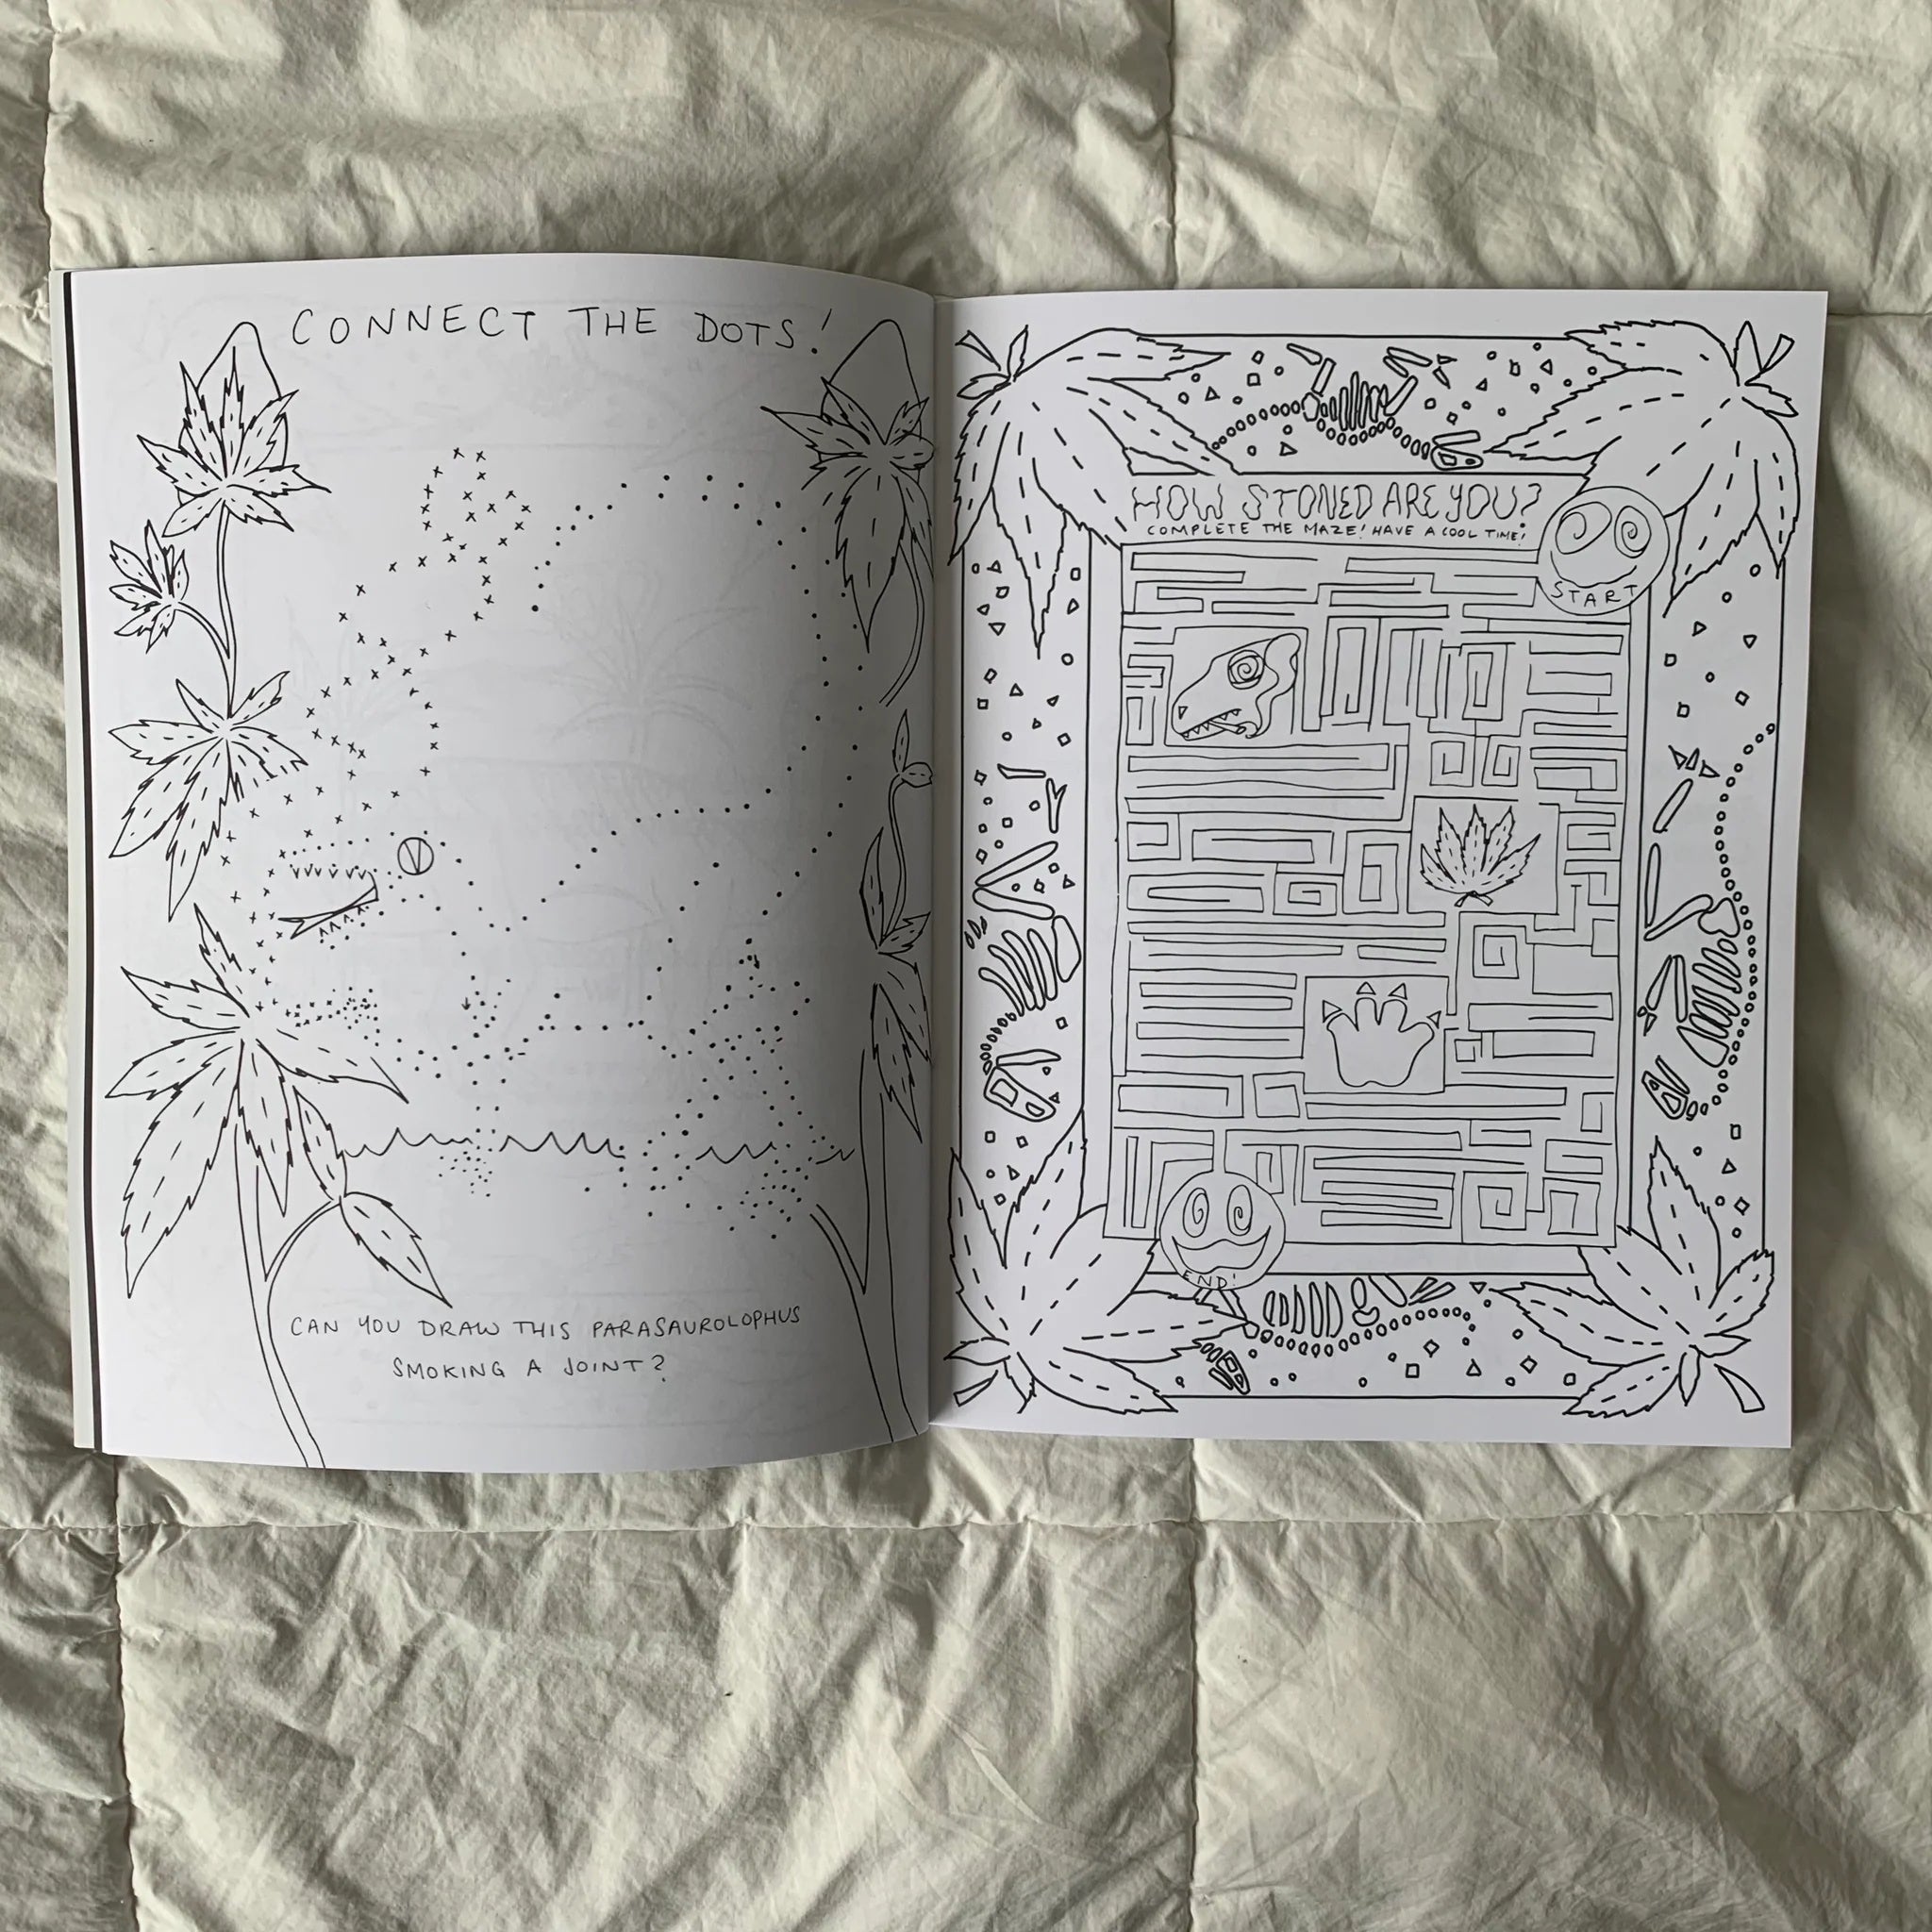 Artist Goes Outside The Lines With Coloring Books For Grown-Ups